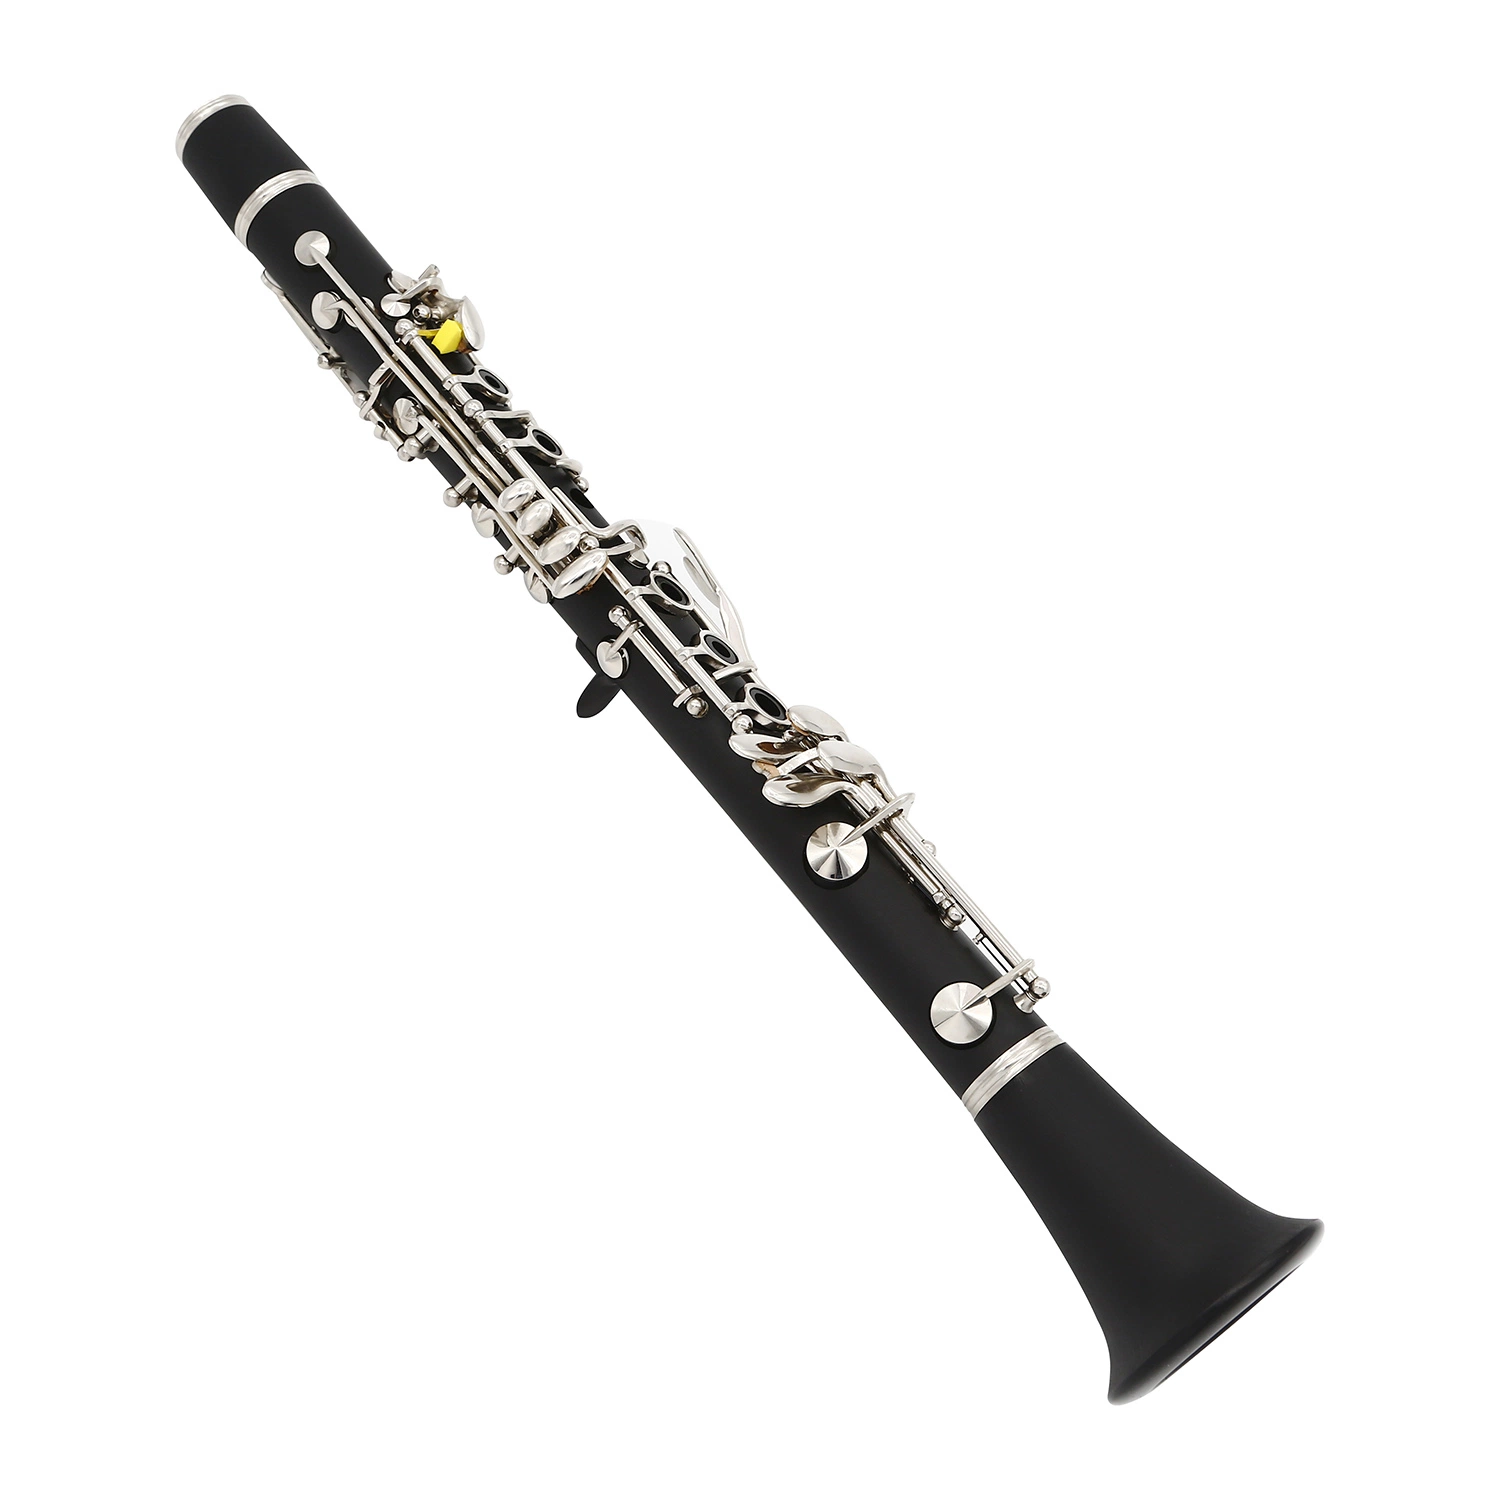 Hard Rubber Clarinet, Made in China, Wholesale Woodwind Musical Instrument